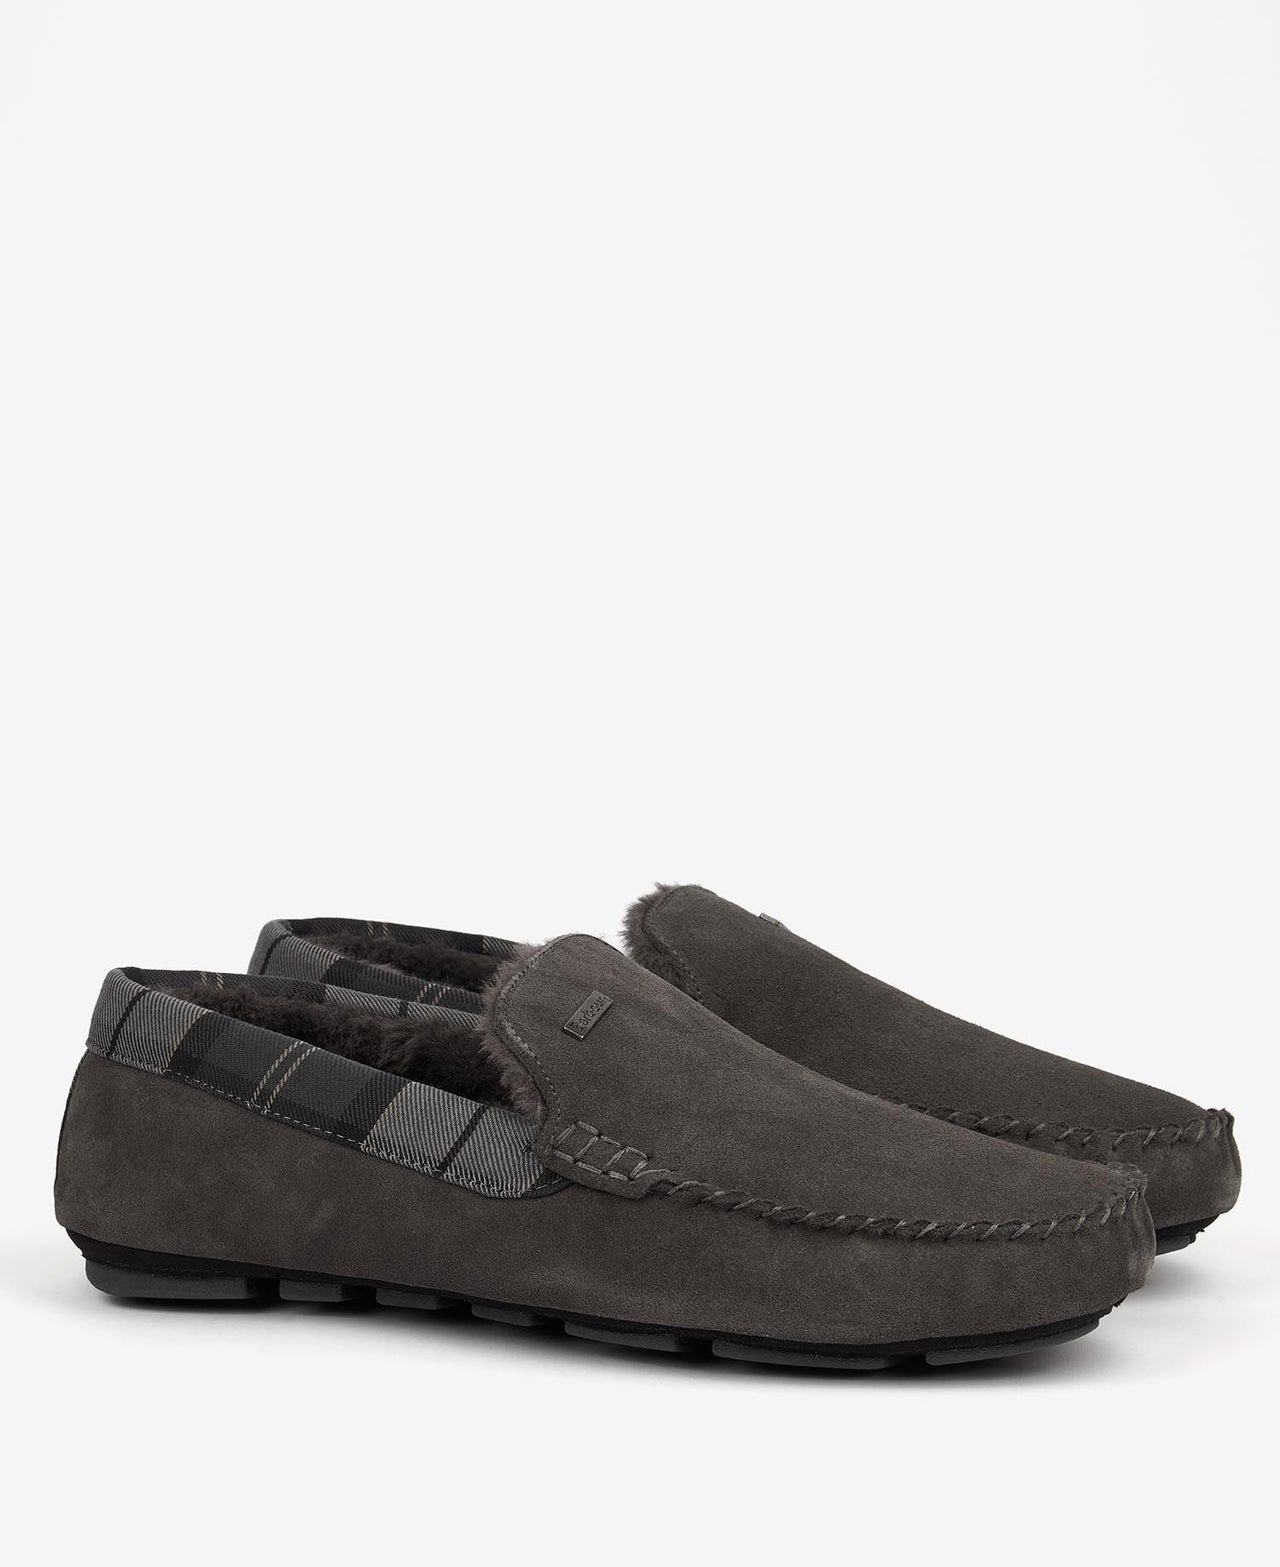 Barbour Monty Slippers - Grey